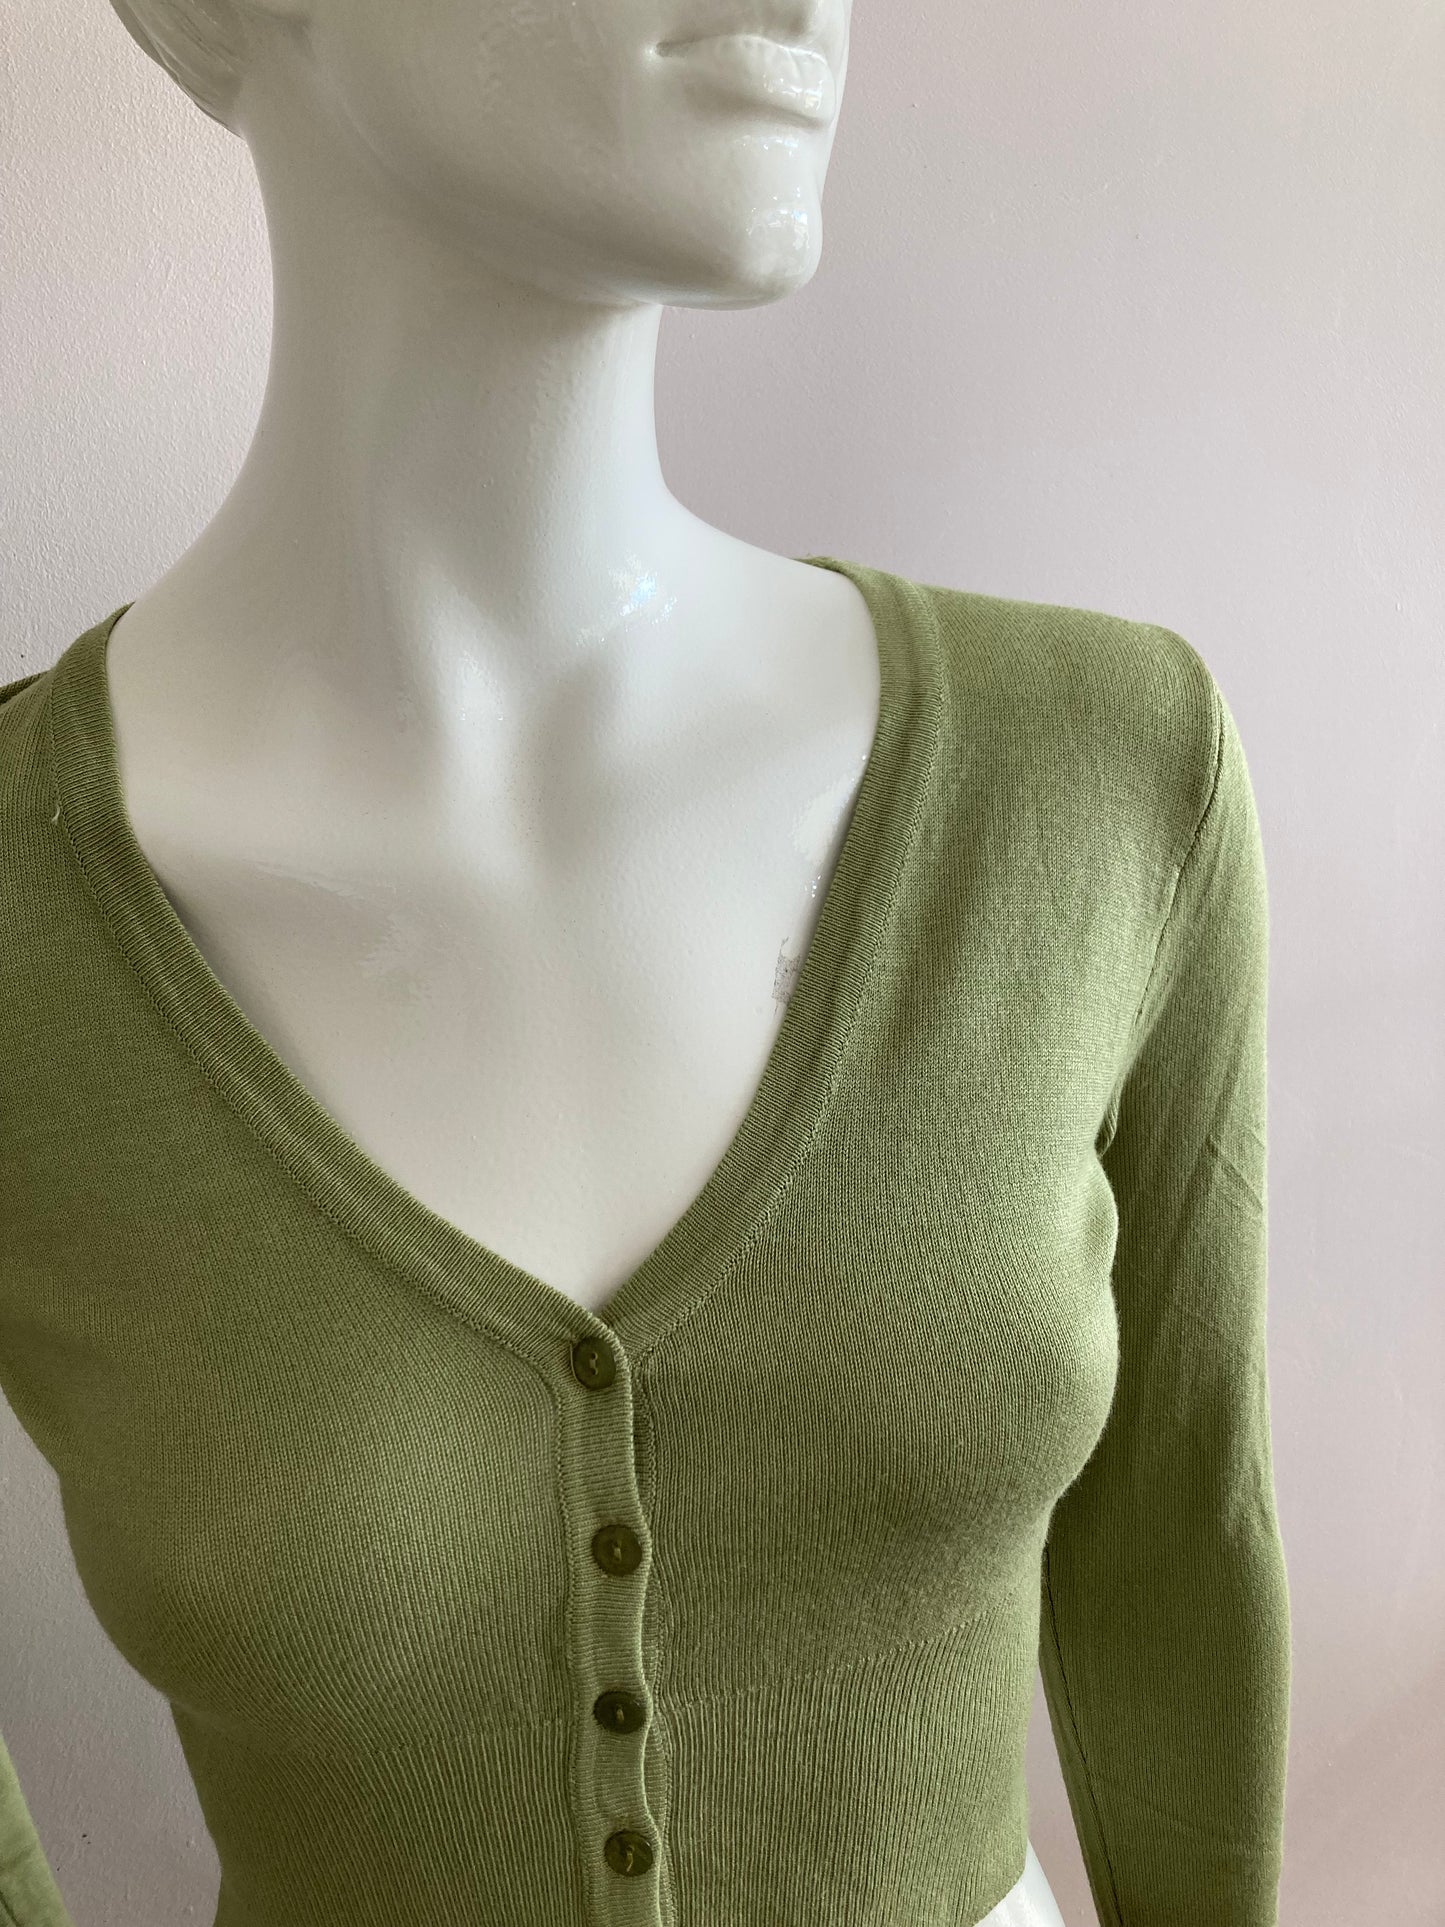 Short cardigan in green with lace pattern on the back